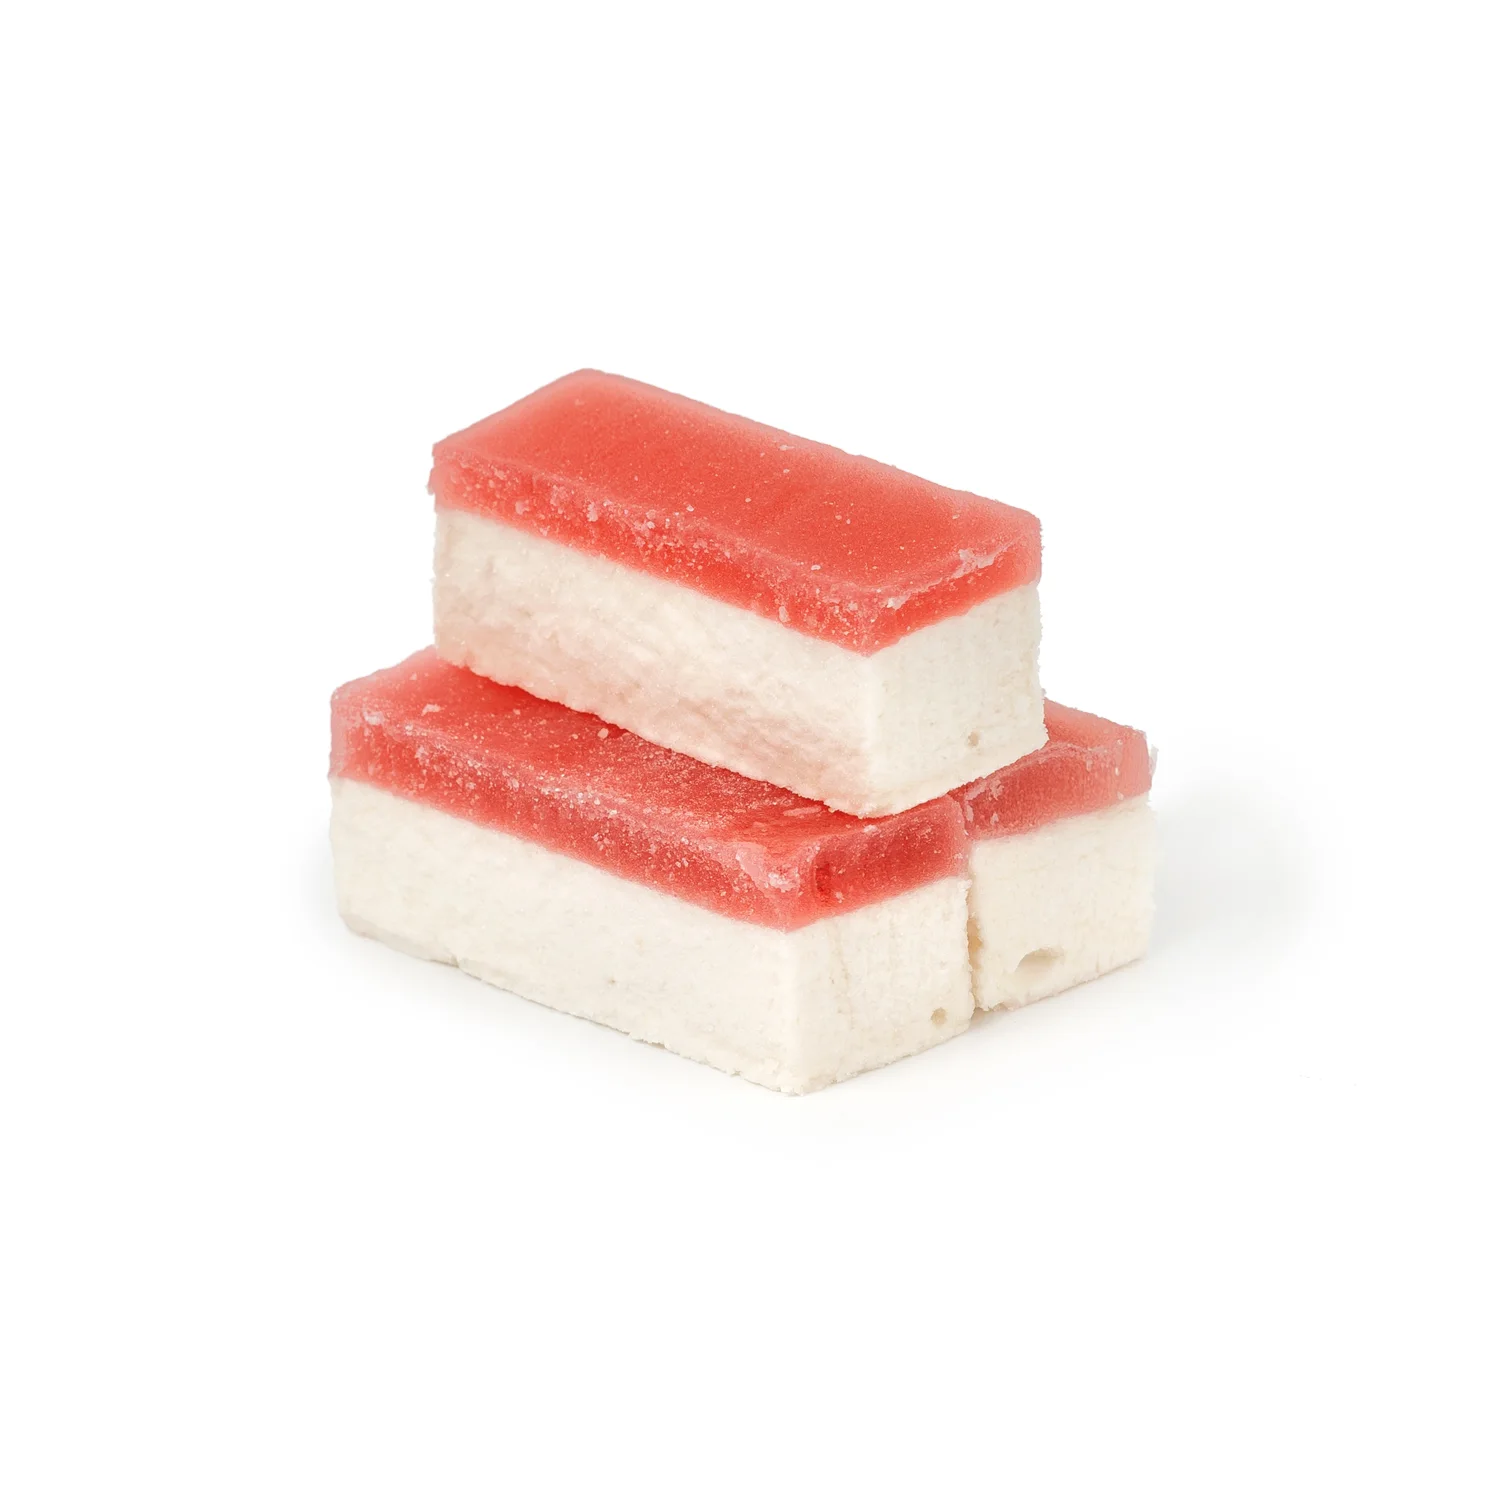 The pastille is two-layered with cranberry, apple and lemon flavors in the assortment 